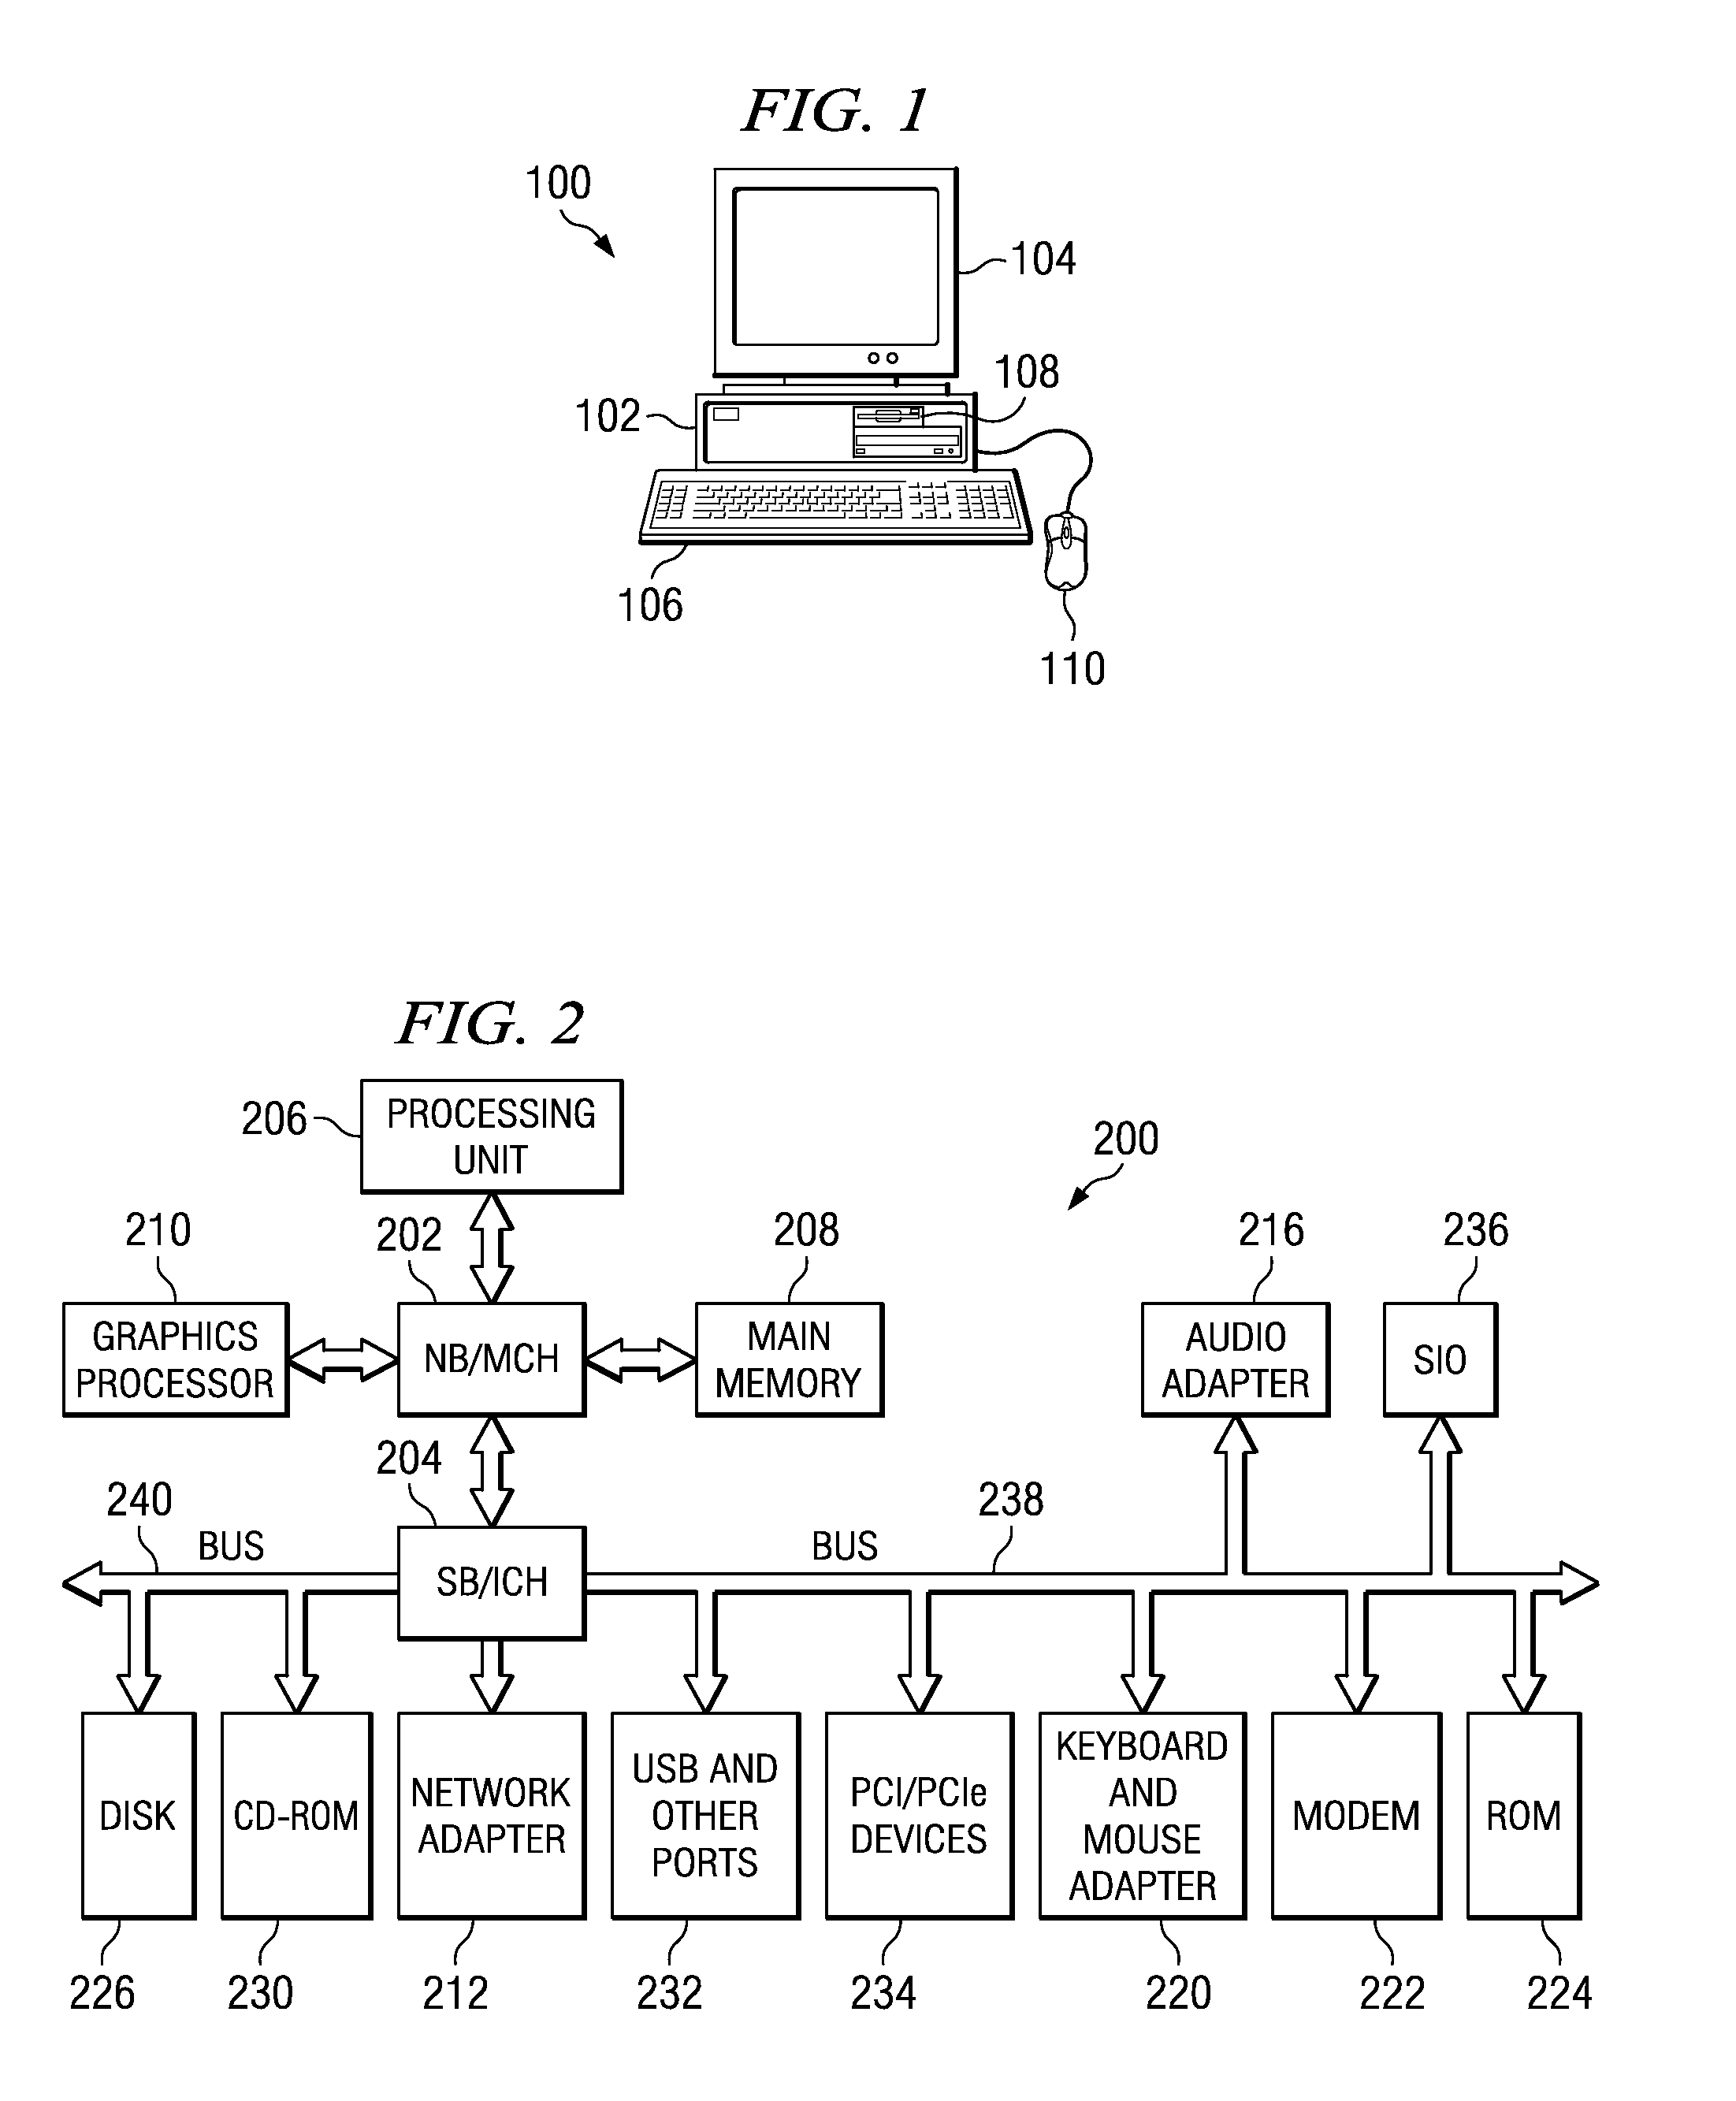 System for Unified Management of Power, Performance, and Thermals in Computer Systems